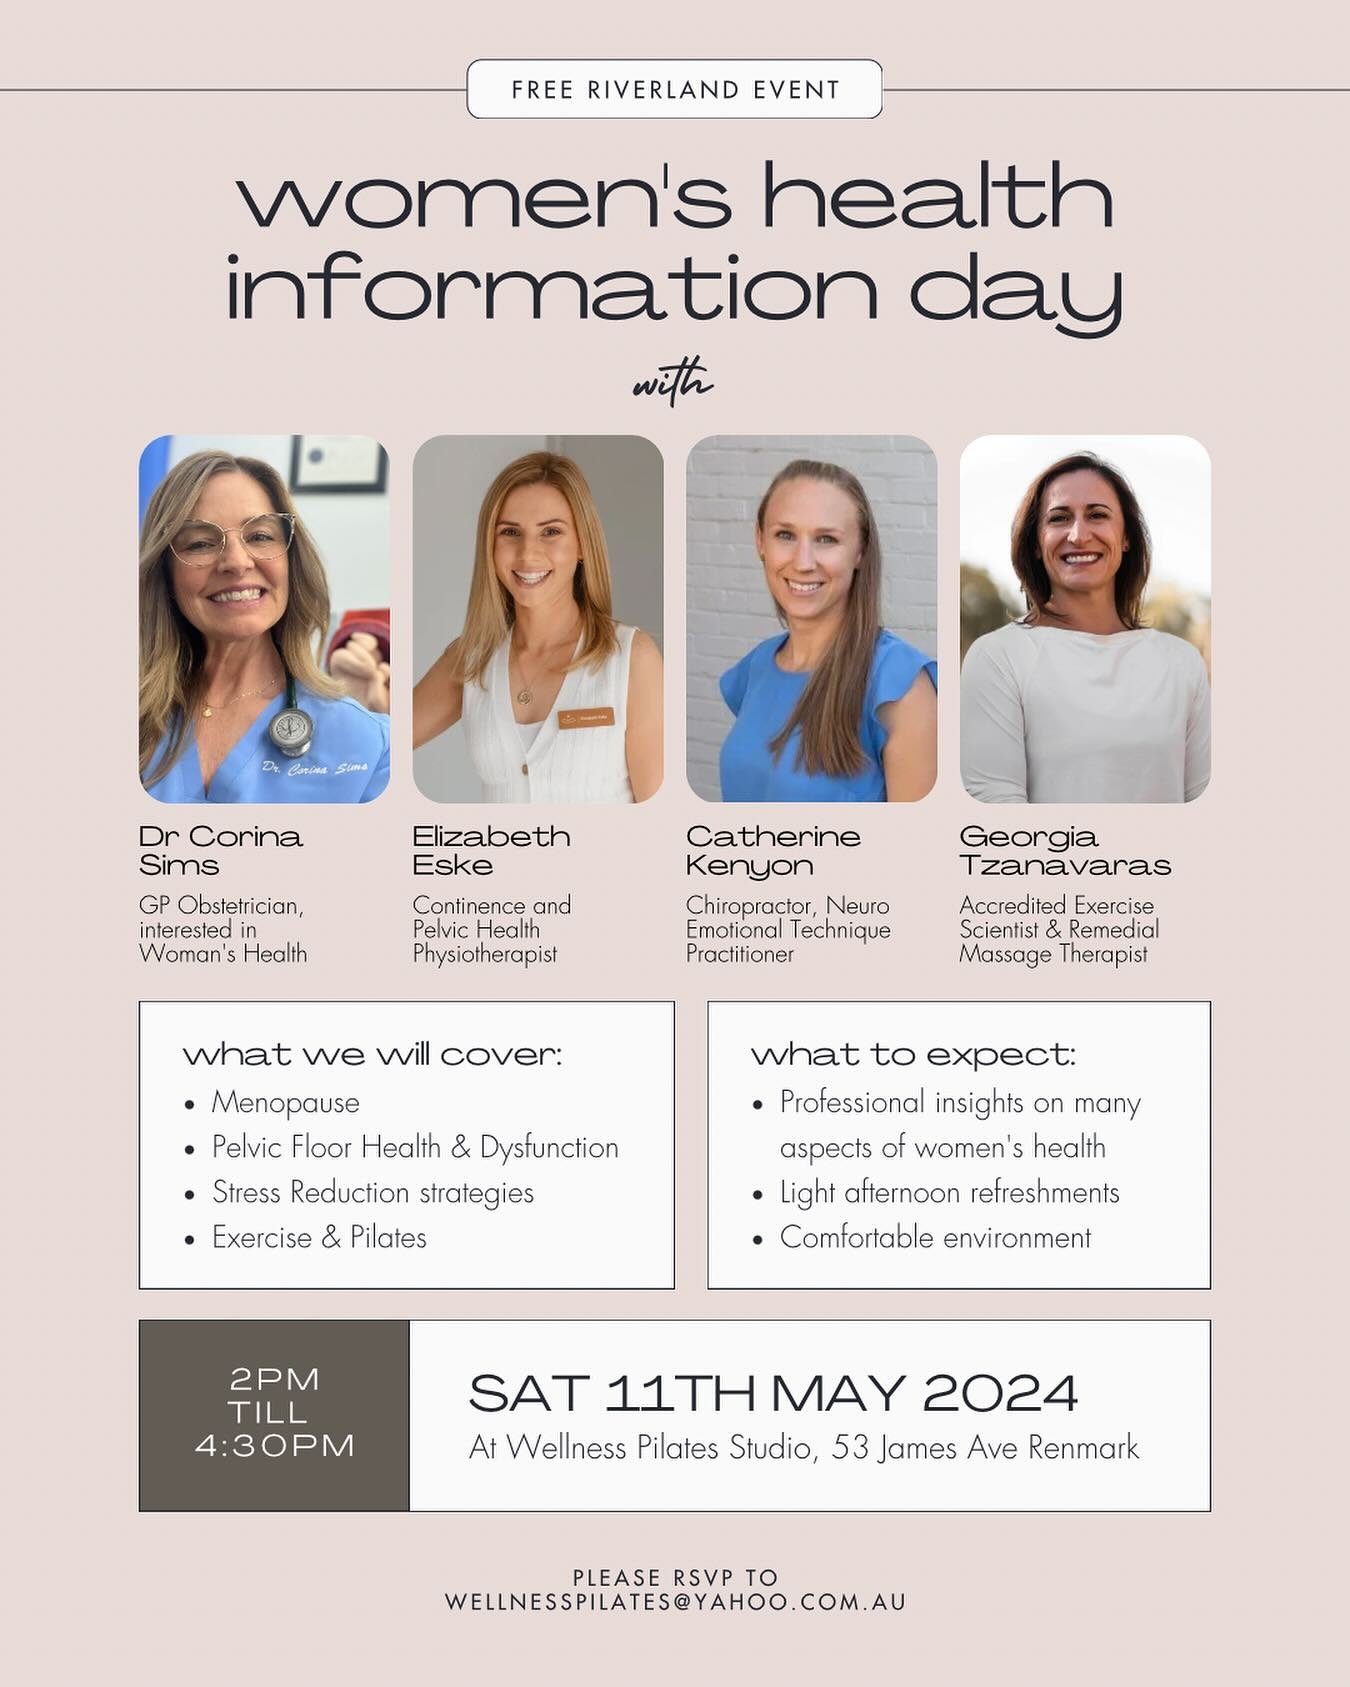 An afternoon full of information around women&rsquo;s health with a variety of speakers all with amazing knowledge to share! 

I will be chatting about the importance of pelvic floor health &amp; common conditions which may occur after having childre